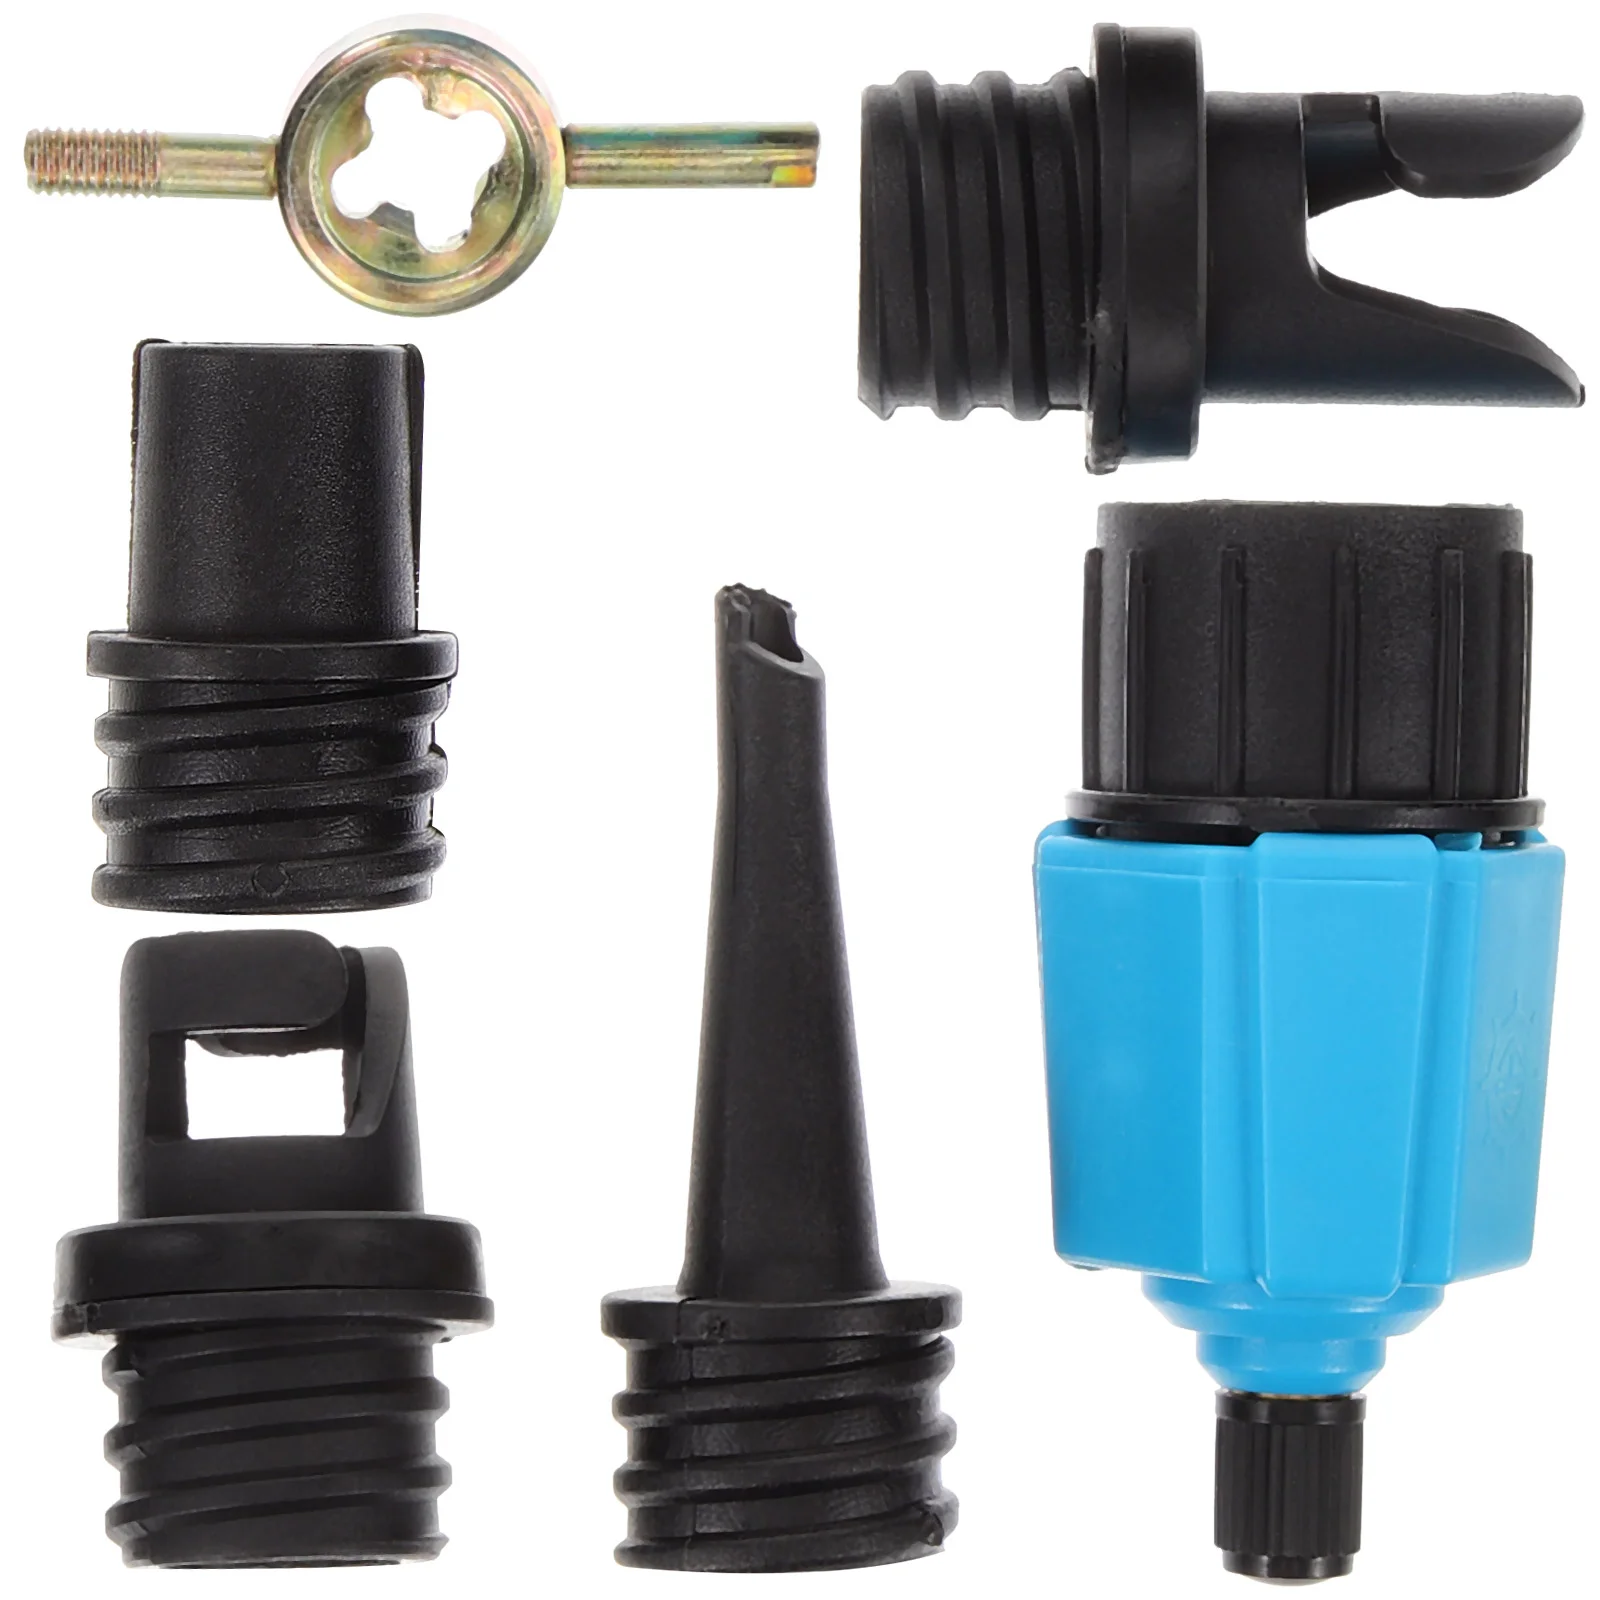 

Air Valve Adapter Inflatable Boat Pump Converter Sup Value Compressor Attachments For Inflatables Paddle Board Alloy